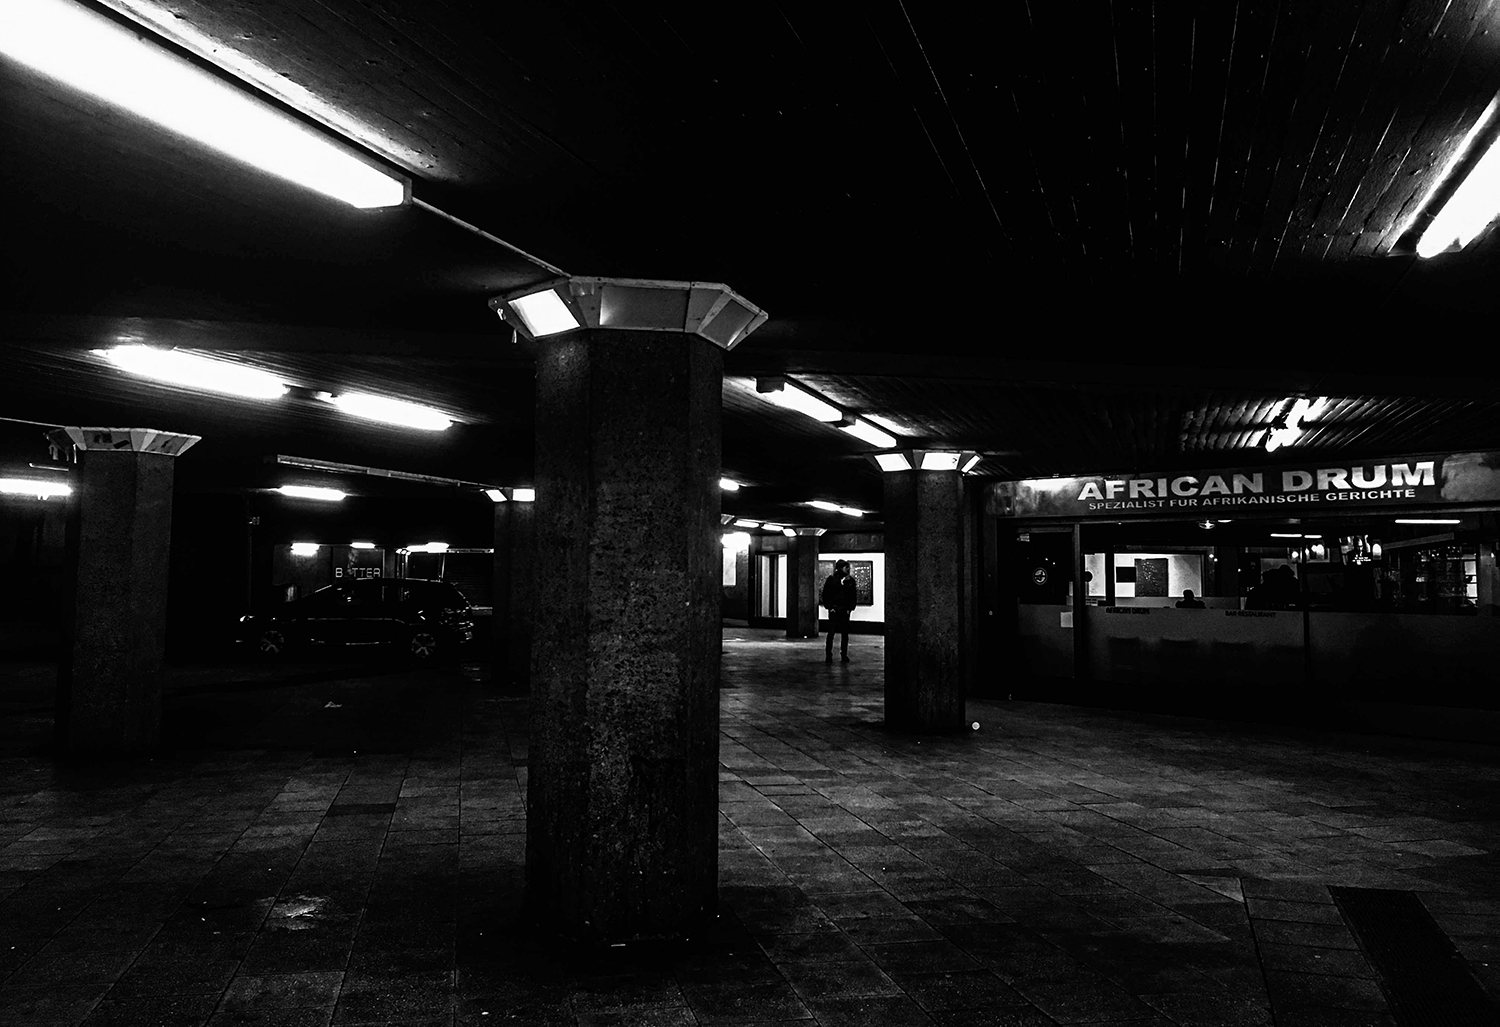 <p>Cologne's Ebertplatz shows its 1970s urban design, provoking the usual love-hate response. While the dark corners of its pedestrian underpasses have raised concerns about crime and safety, these recesses also host art galleries and restaurants (like this Nigerian place).</p>